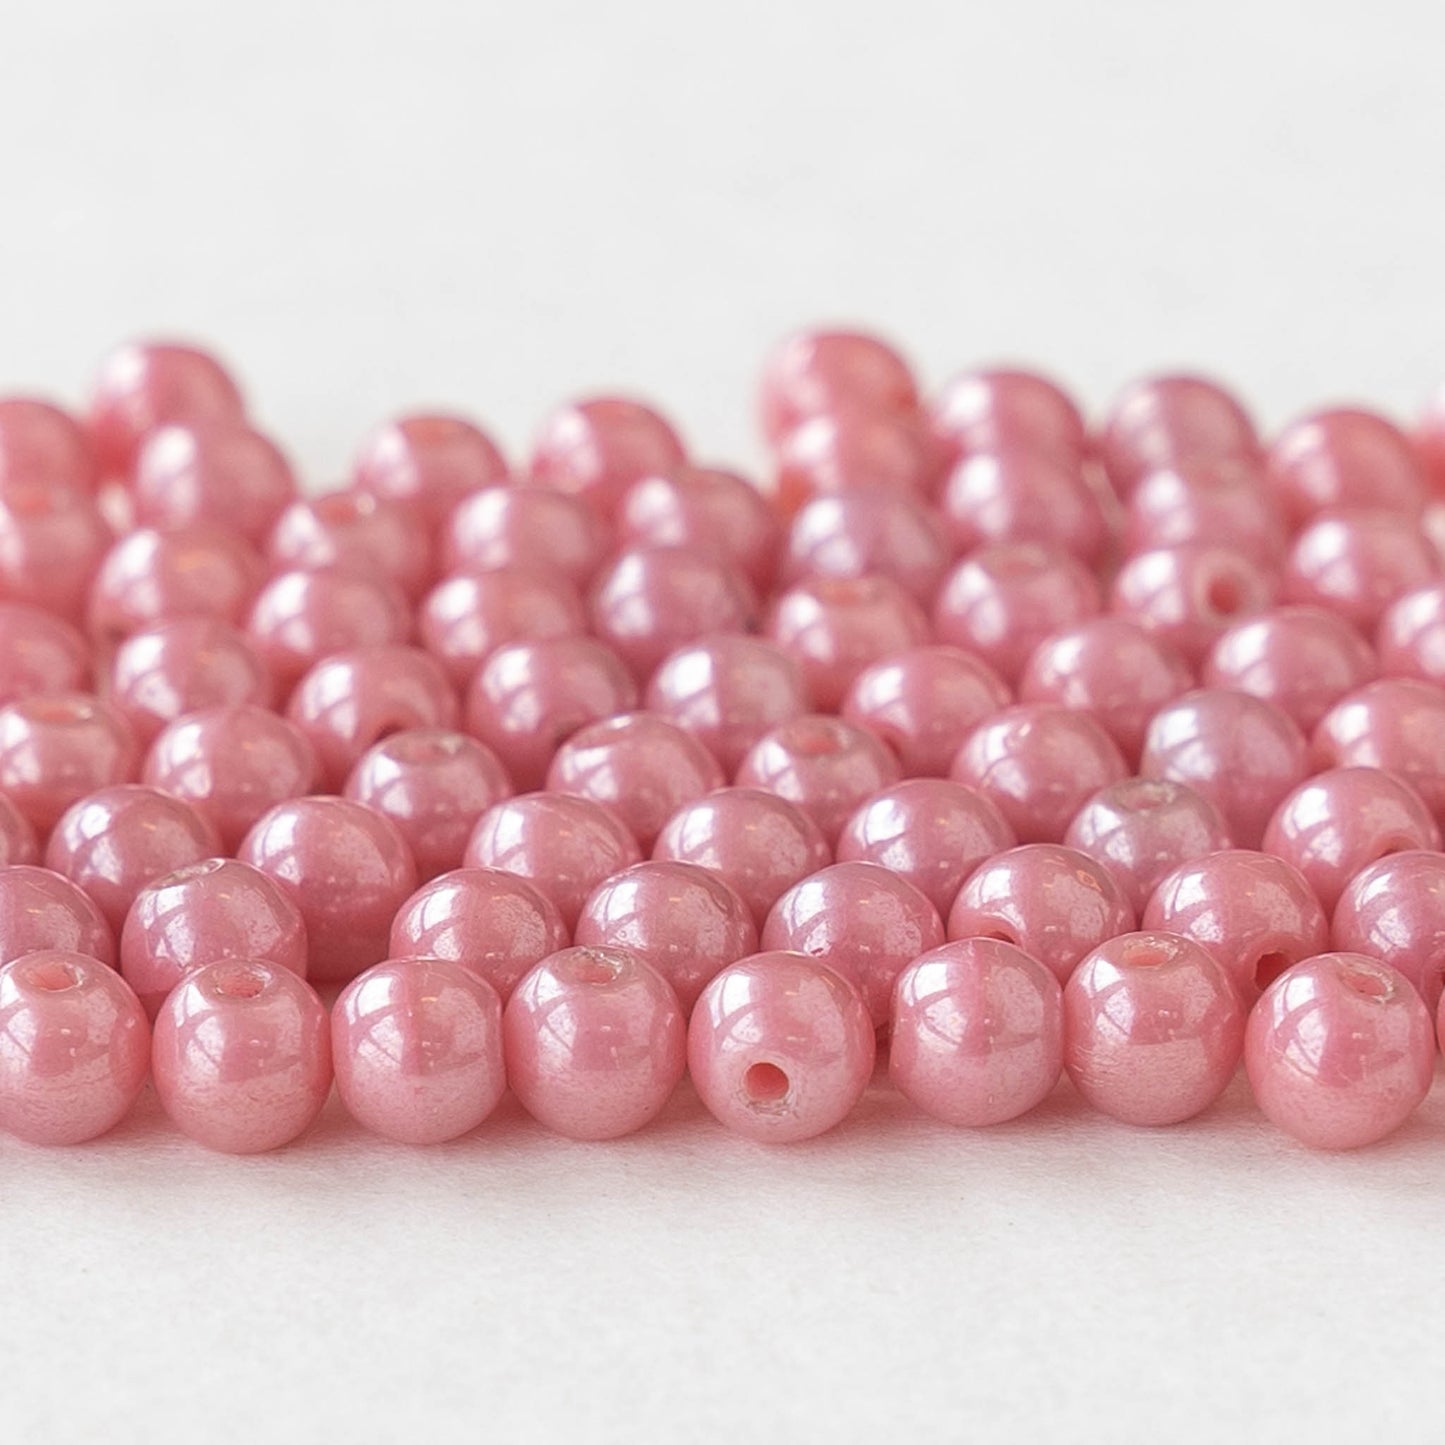 4mm Round Glass Beads - Pink Luster - 100 Beads